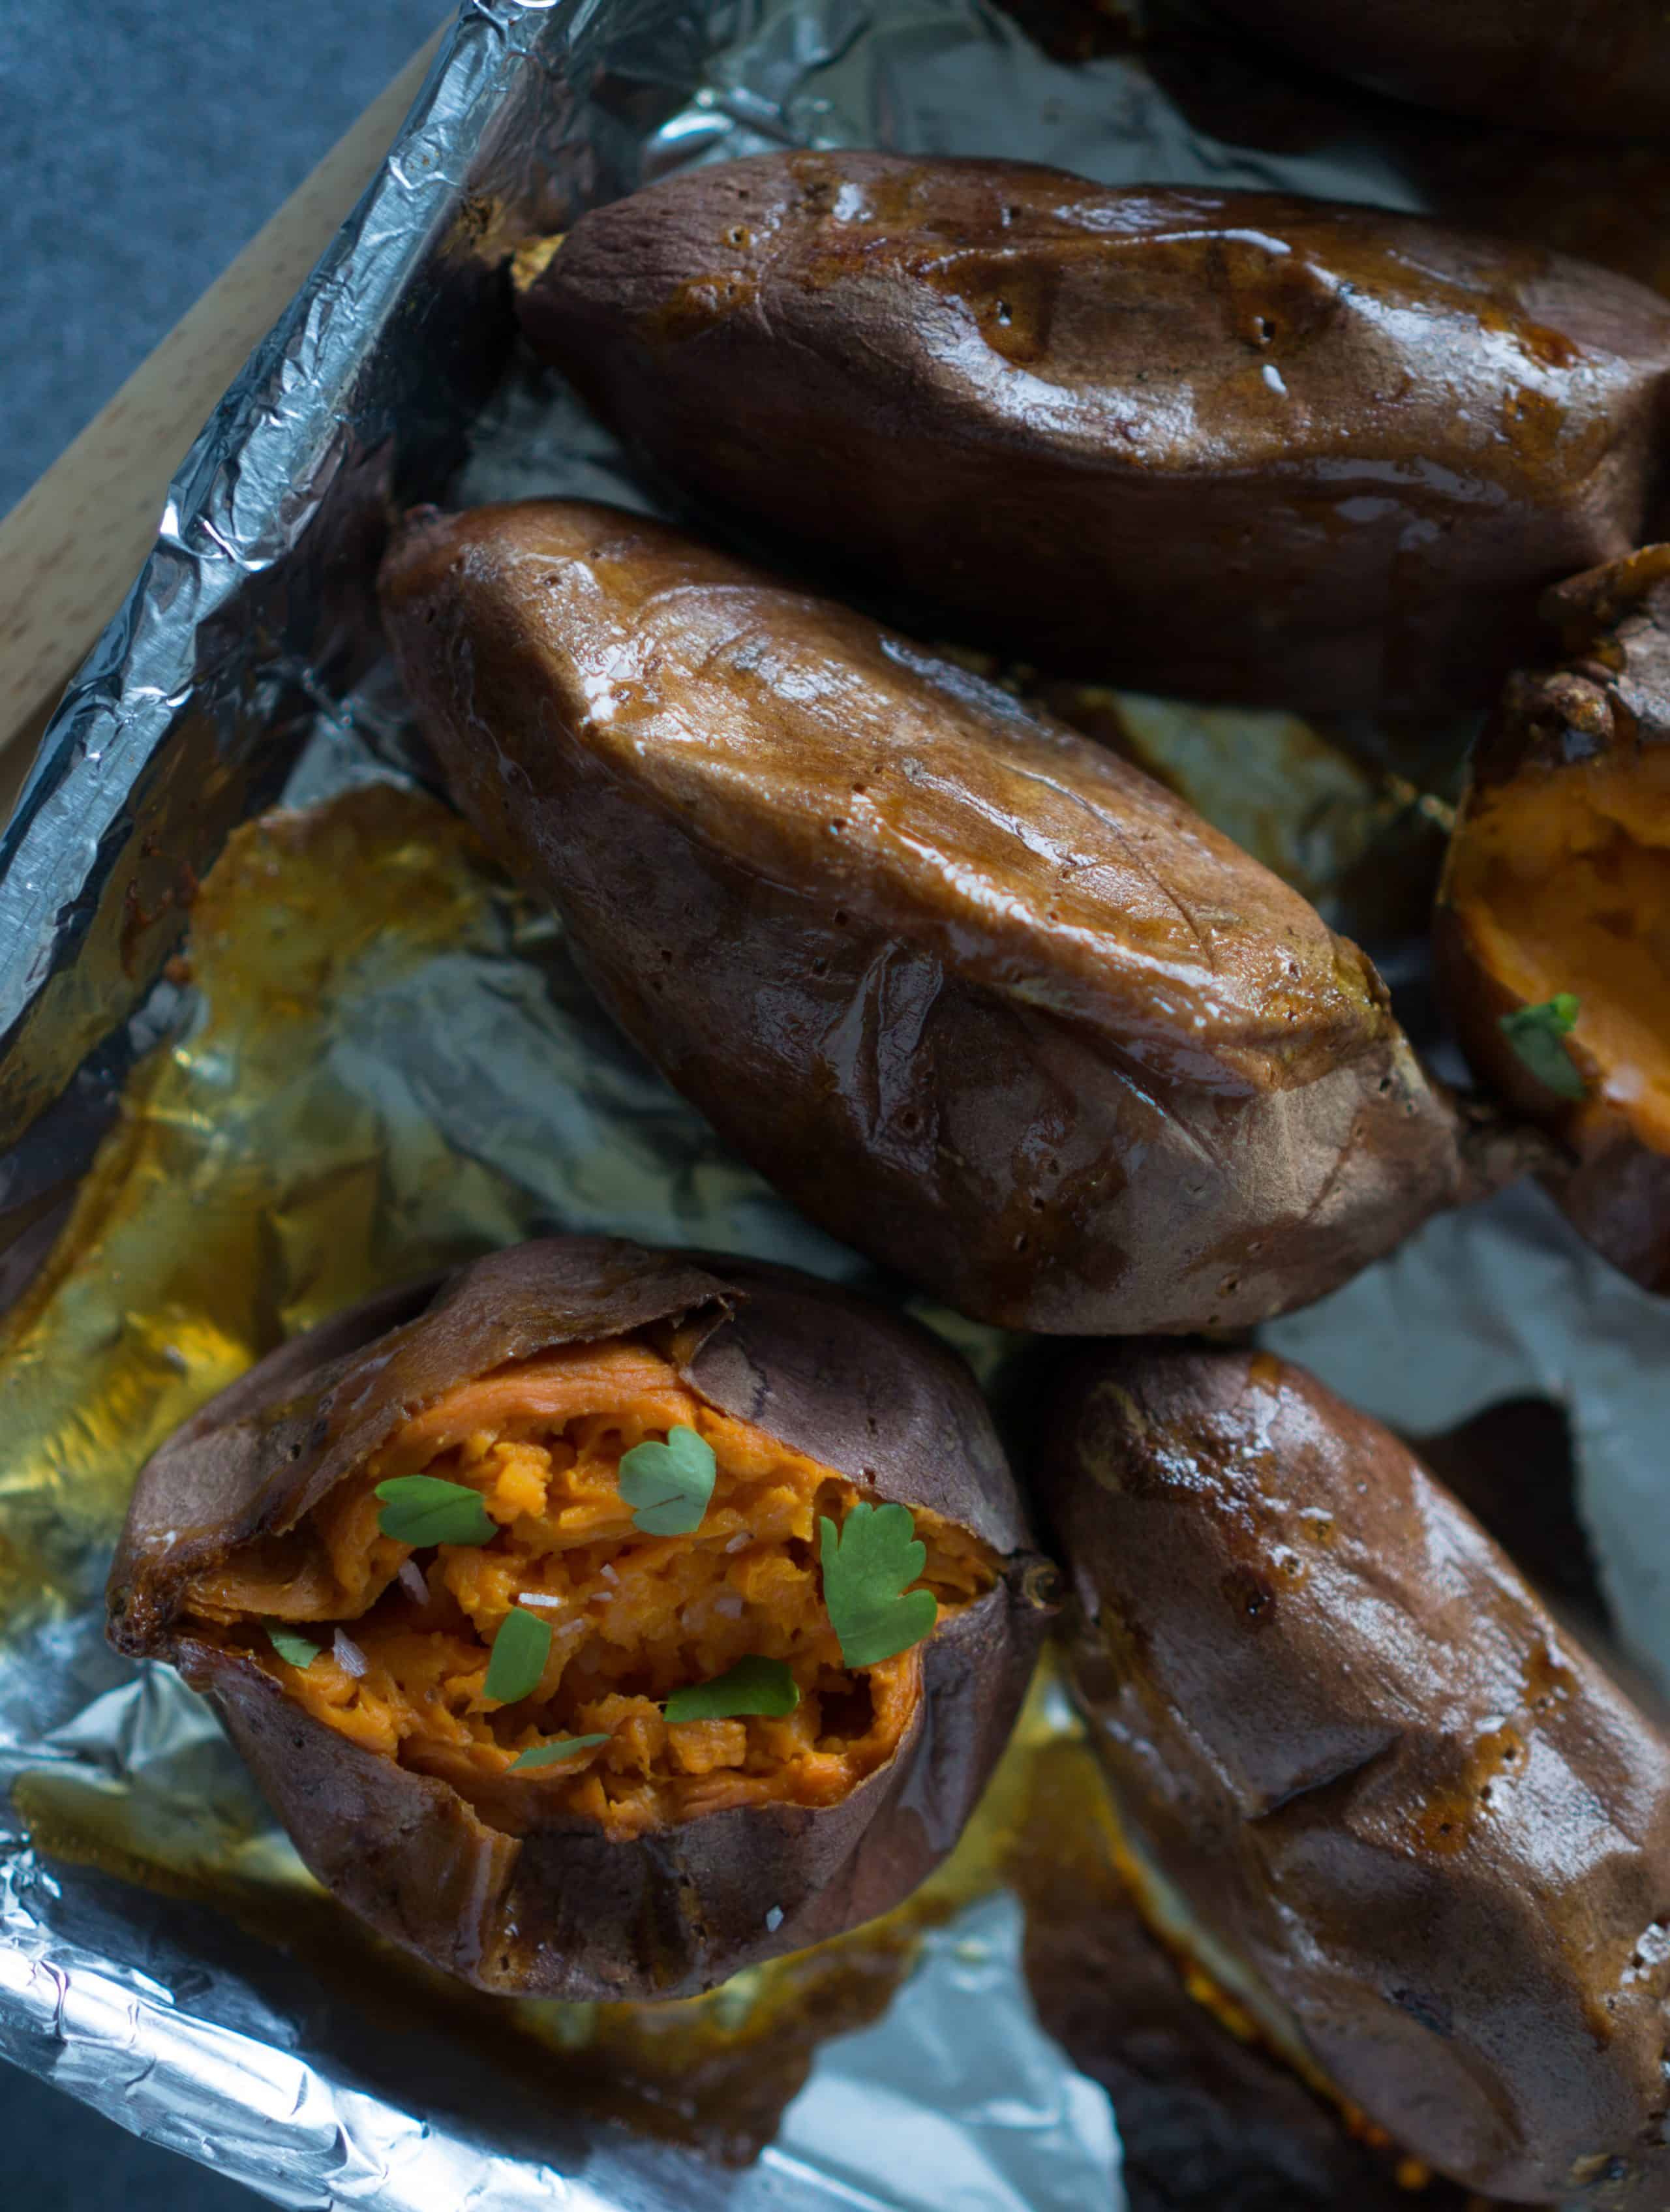 Slow Roasted Sticky Sweet Potatoes - We love this simple, vegan recipe for Slow Roasted Sticky Sweet Potatoes! Just 2 ingredients (olive oil + sweet potatoes) & a hot oven are all you need for perfectly caramelized sweet potatoes every time! | freeyourfork.com